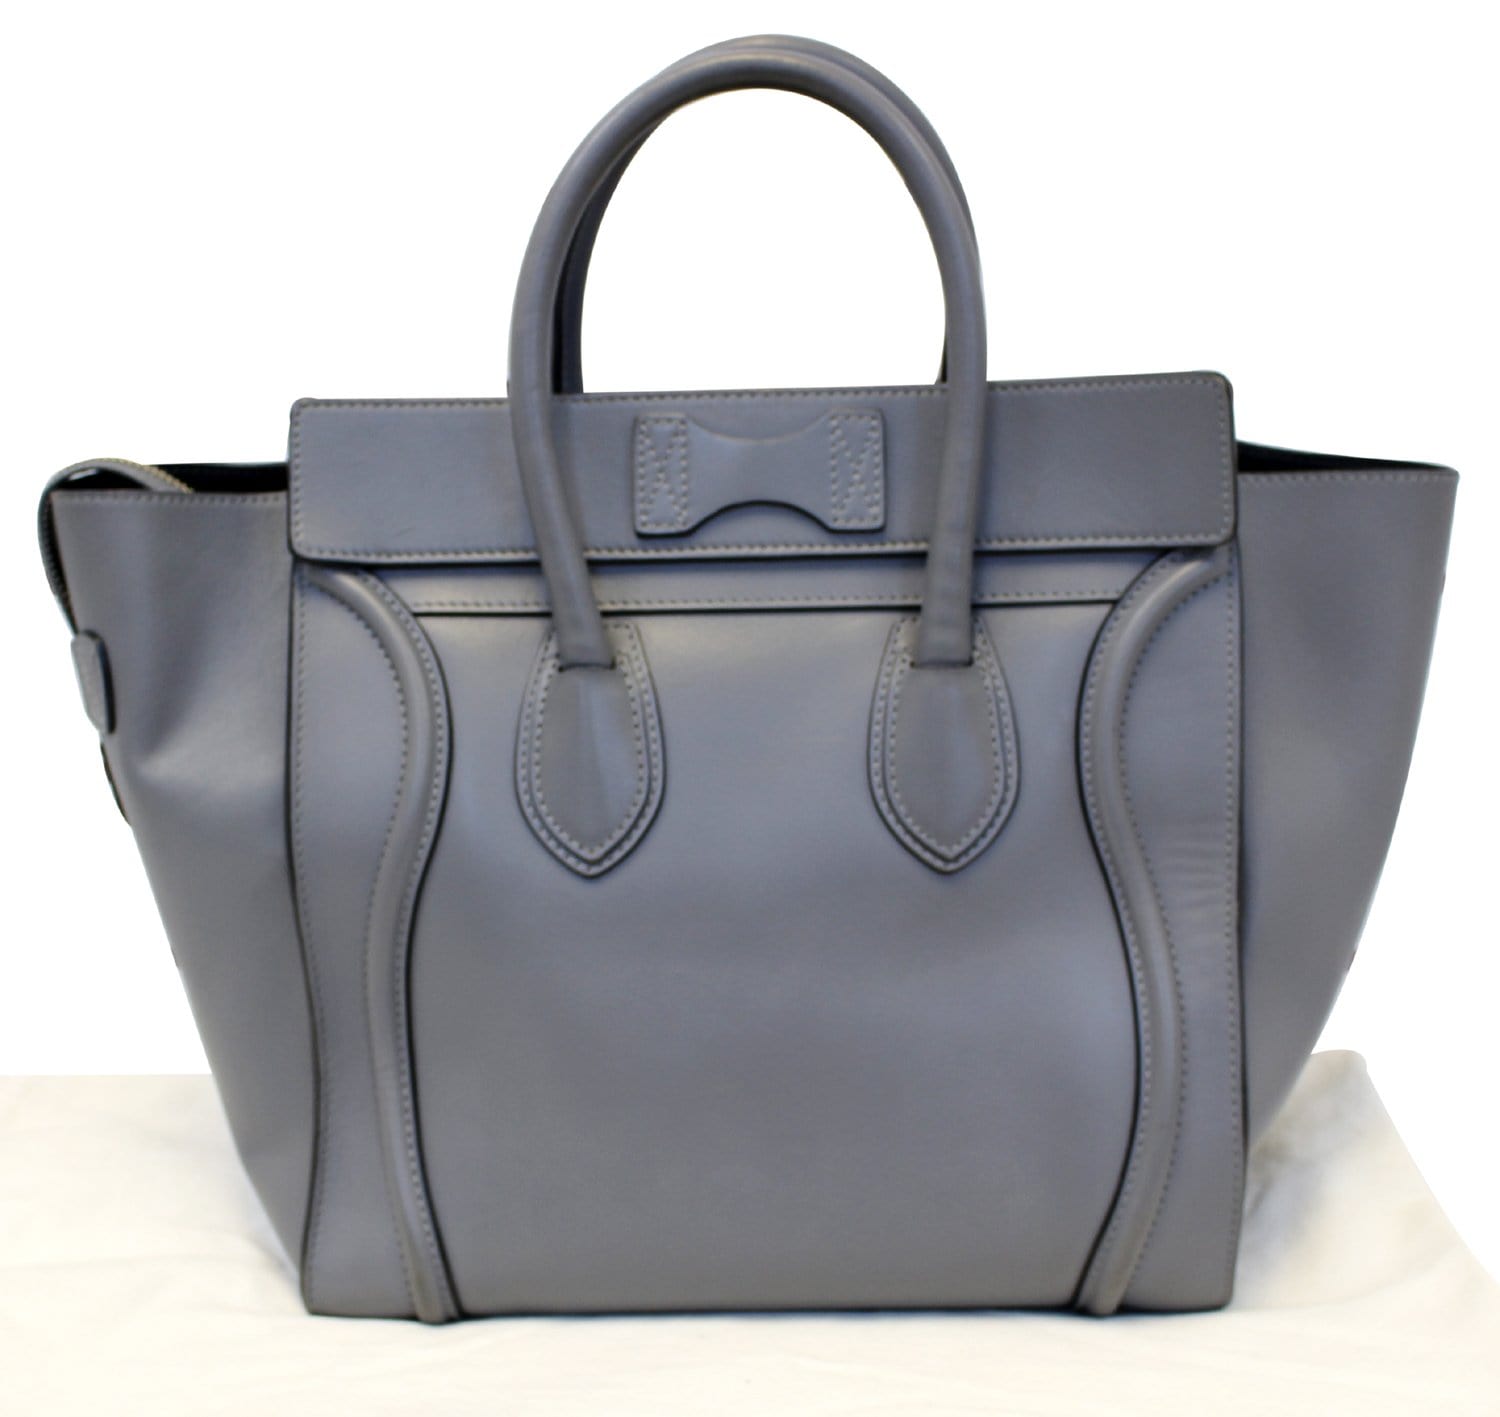 Authentic Celine Brand New Grey Leather Micro Luggage Tote Bag Size Large